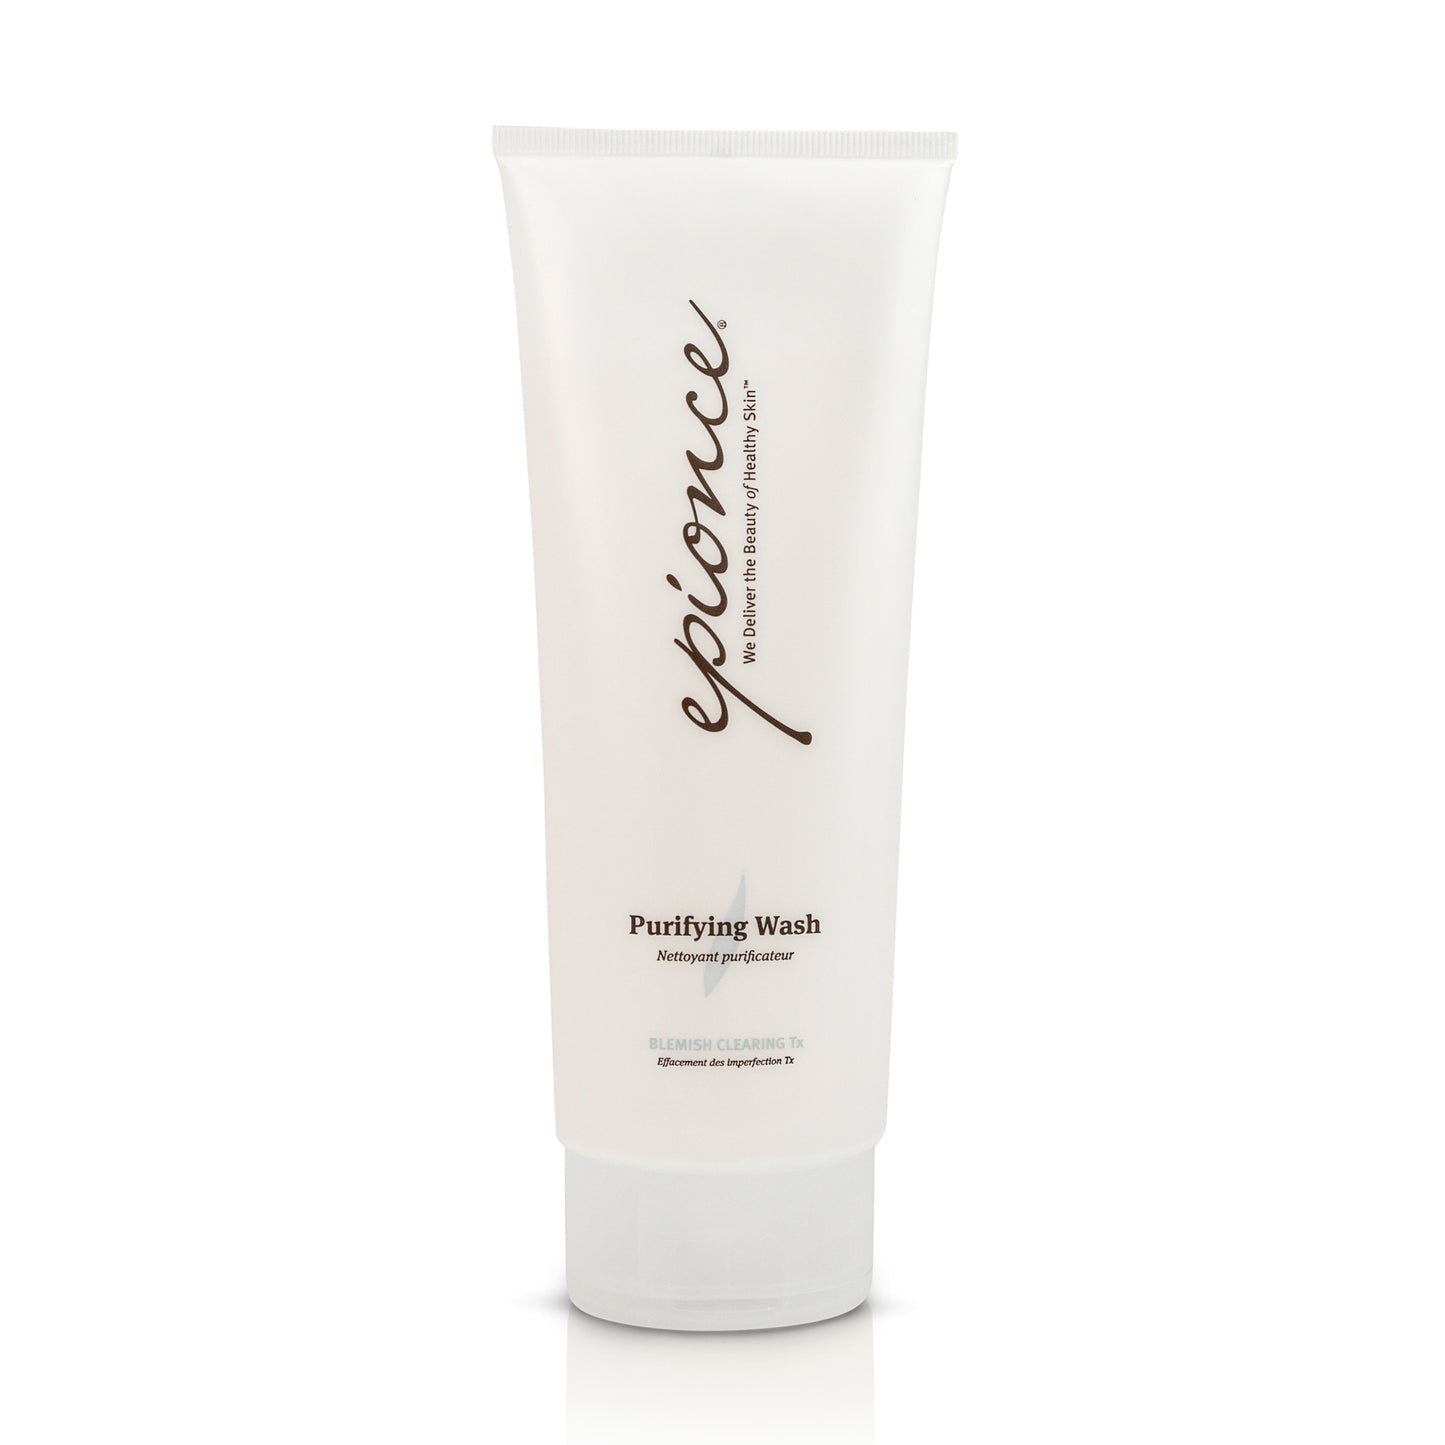 Epionce Purifying Wash clears acne and breakouts